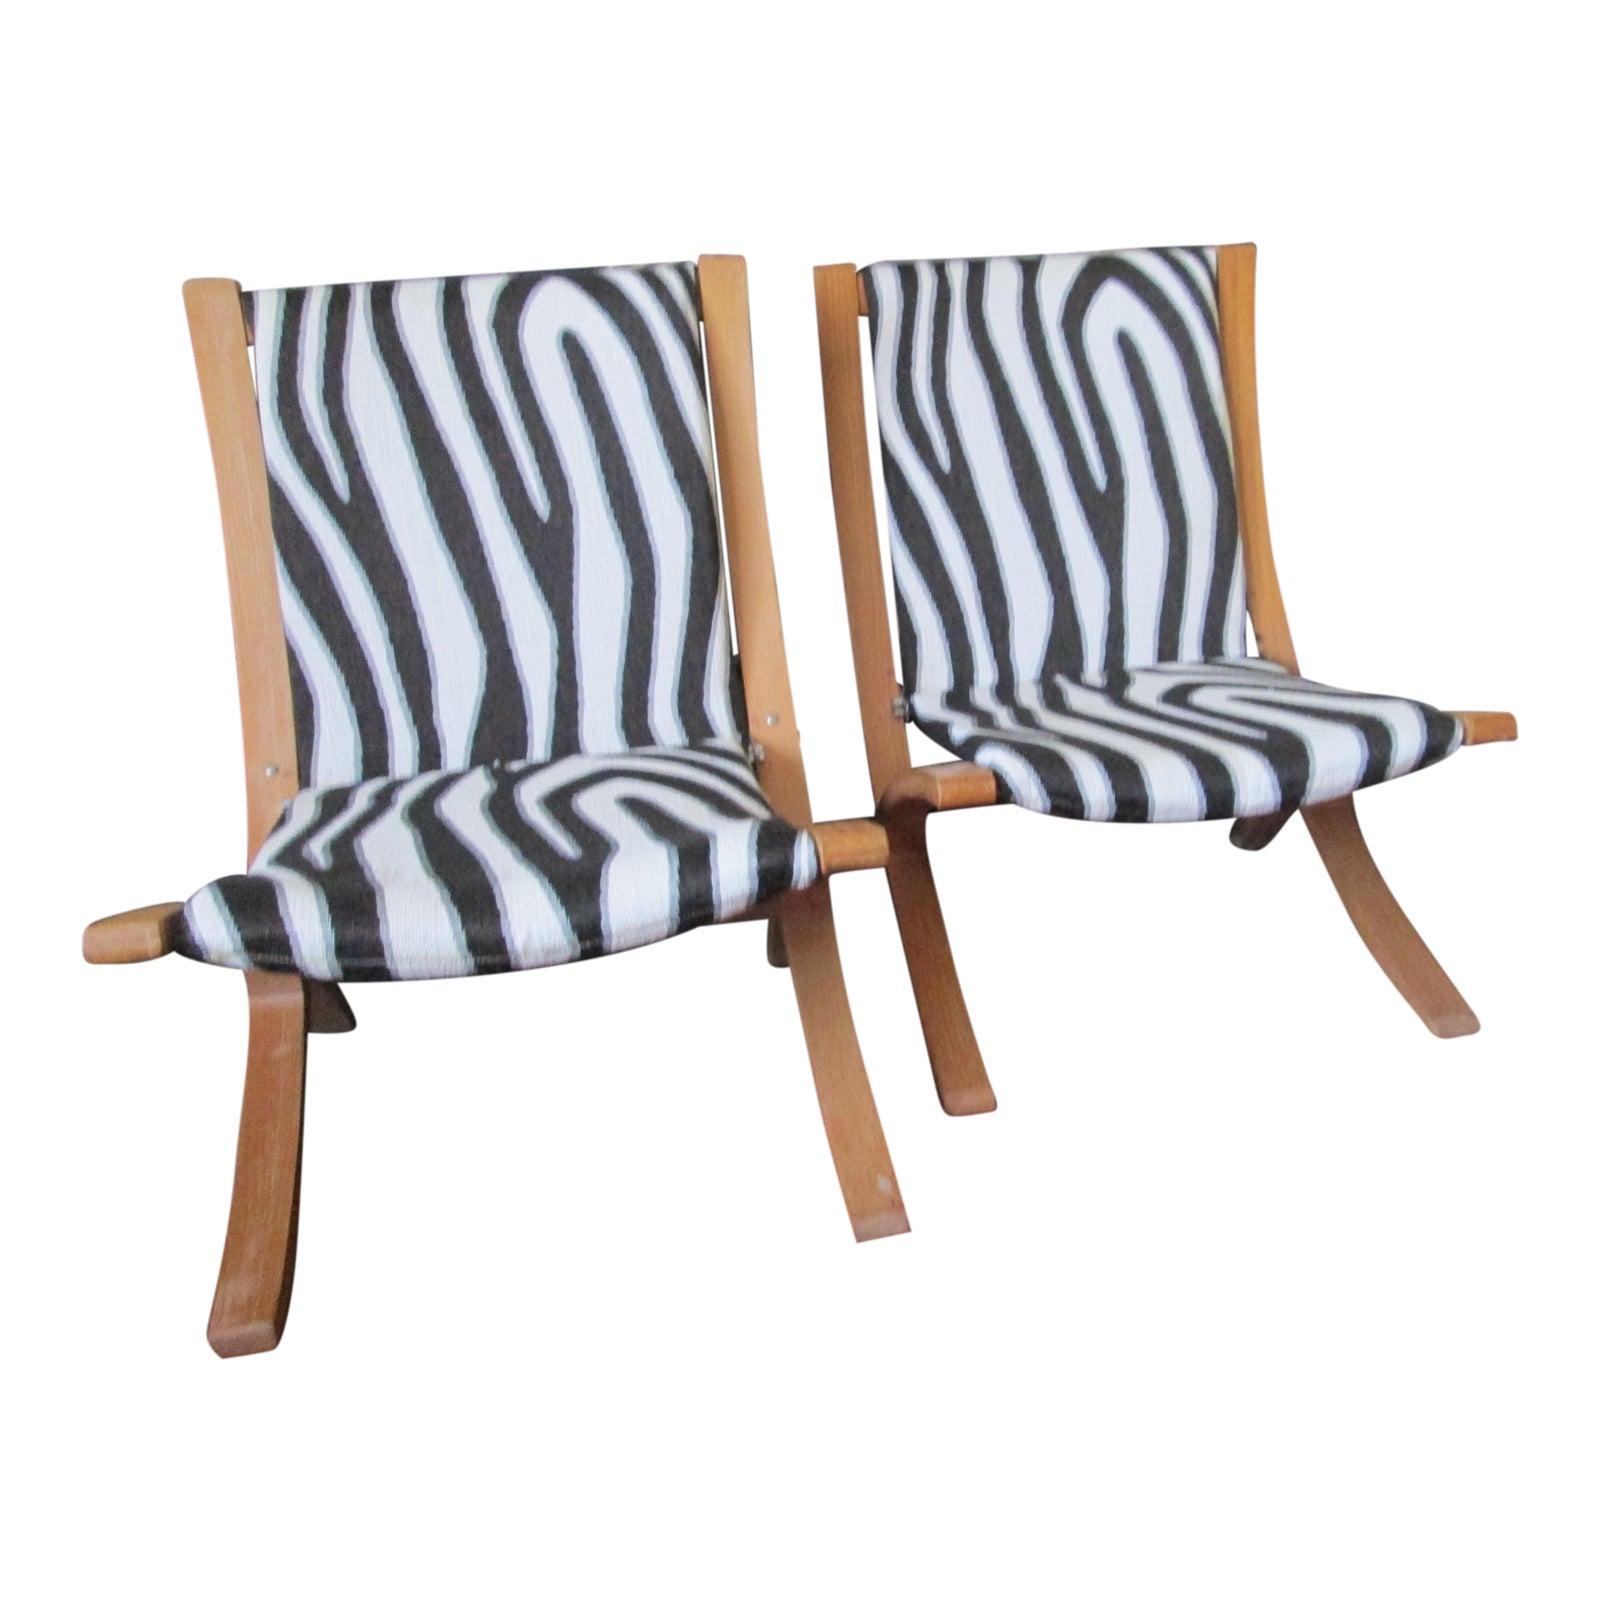 Scissor lounge chairs become even more irresistible re-imagined in a zebra pattern that is chic and durable. This is the most comfortable chair to while away time, read and relax. They are sturdy and in very good vintage condition. 
The chairs are